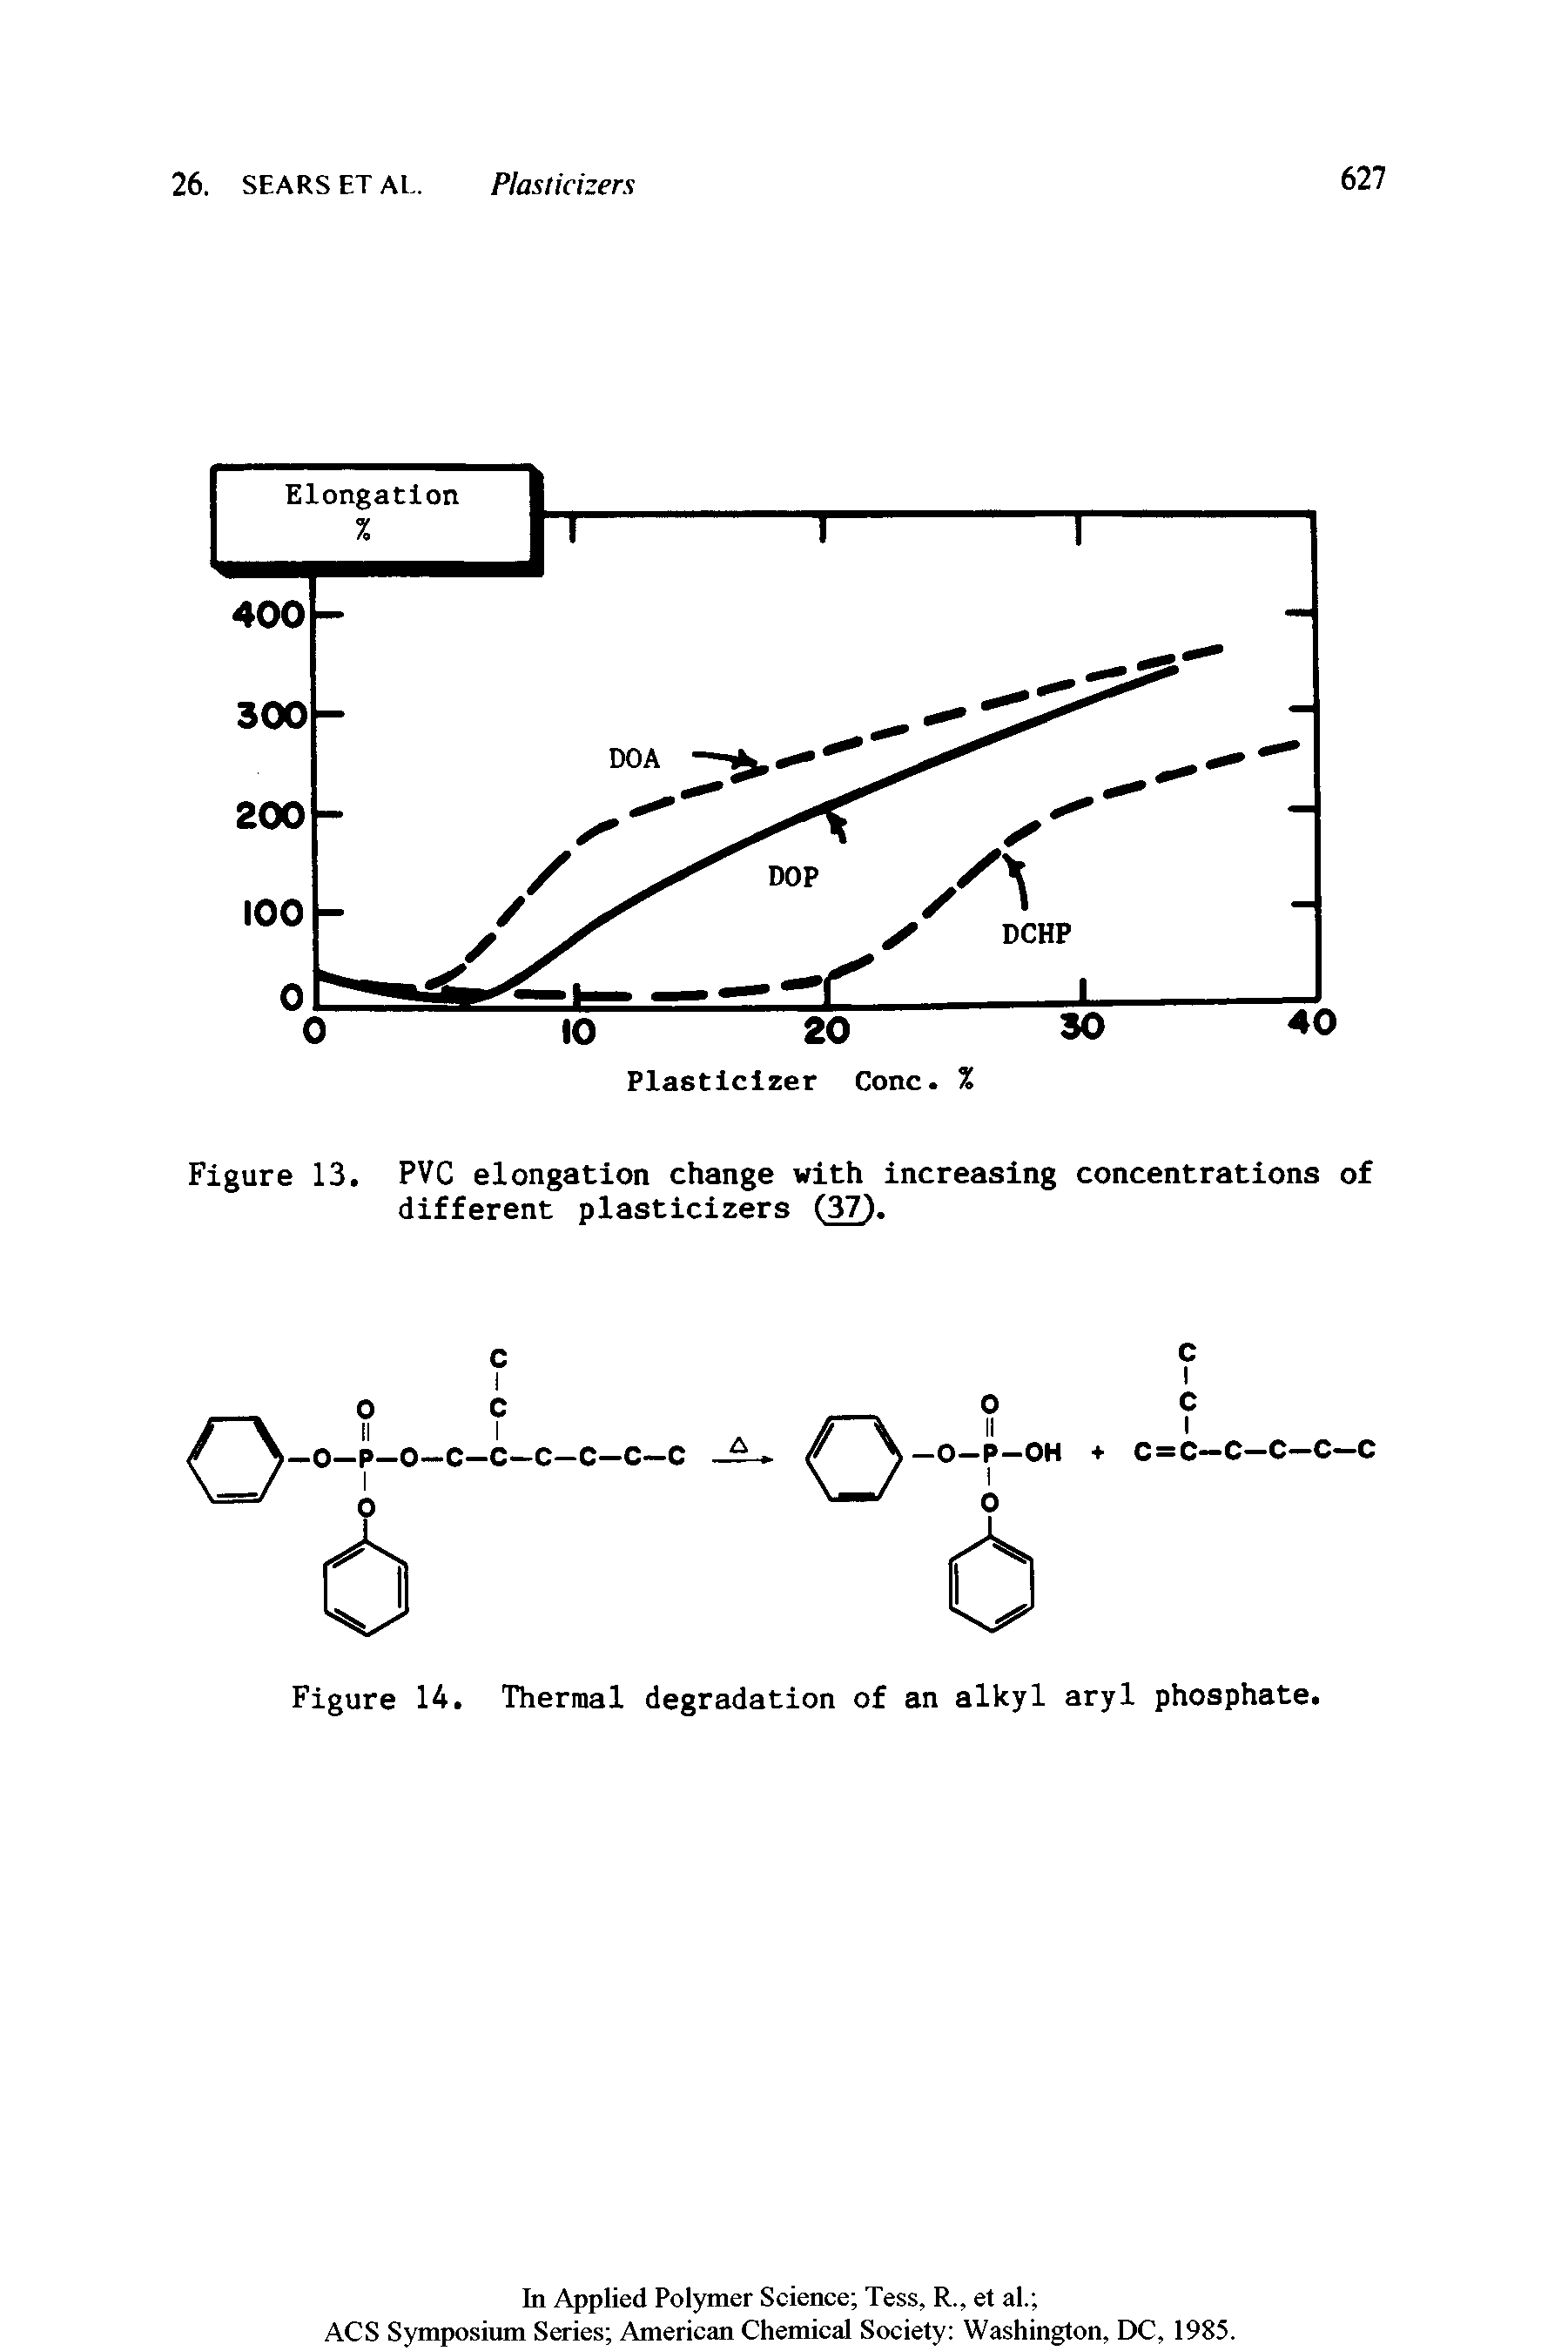 Figure 14. Thermal degradation of an alkyl aryl phosphate.